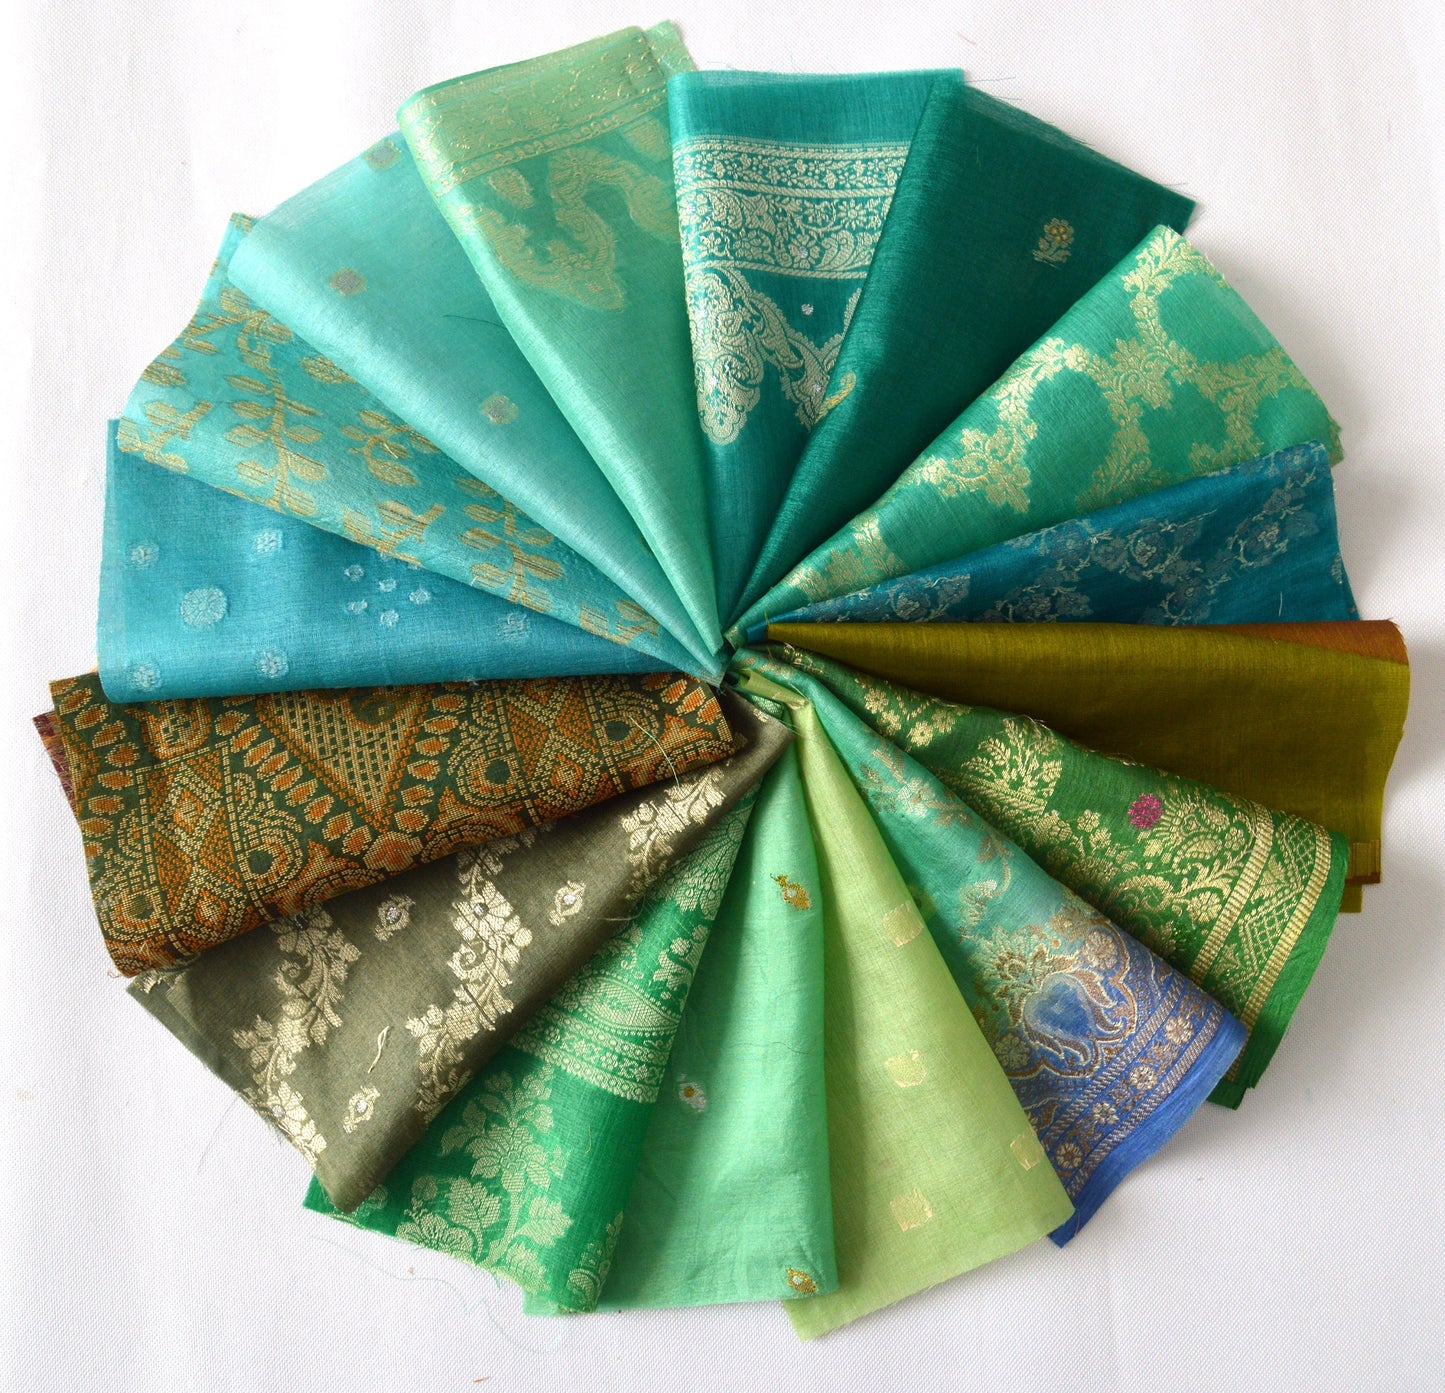 8 Inch x 16 Pieces Green Recycled Vintage Sari Squares Craft Fabric Card Making Collage Mixed Media Textile Art Sewing Junk Journal